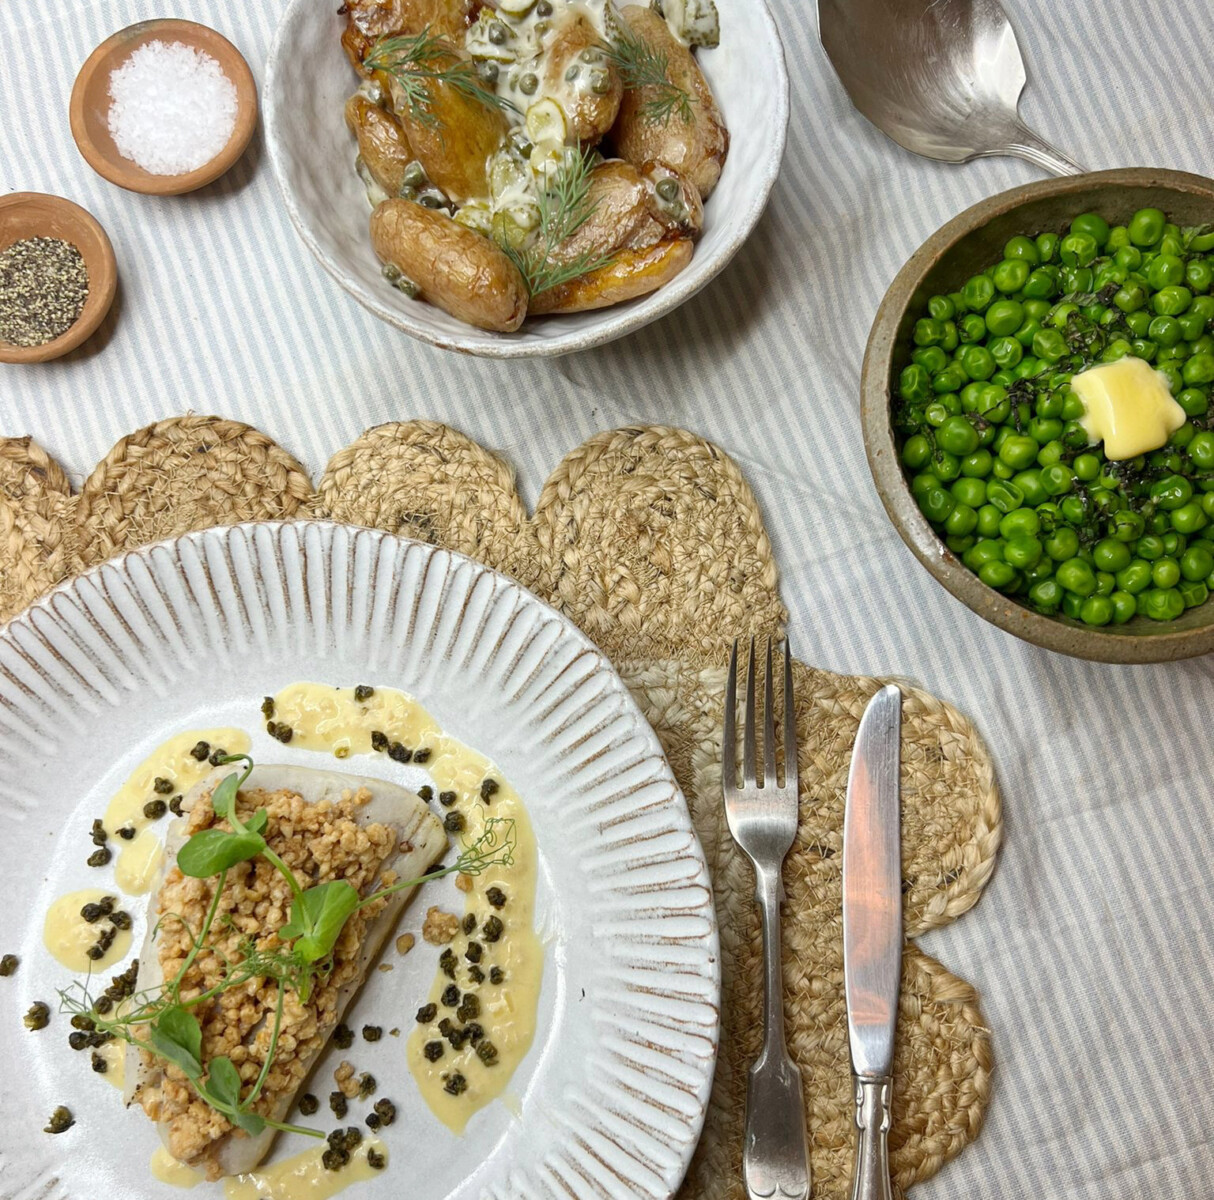 Recipe: Stone bass with crushed potatoes and peas